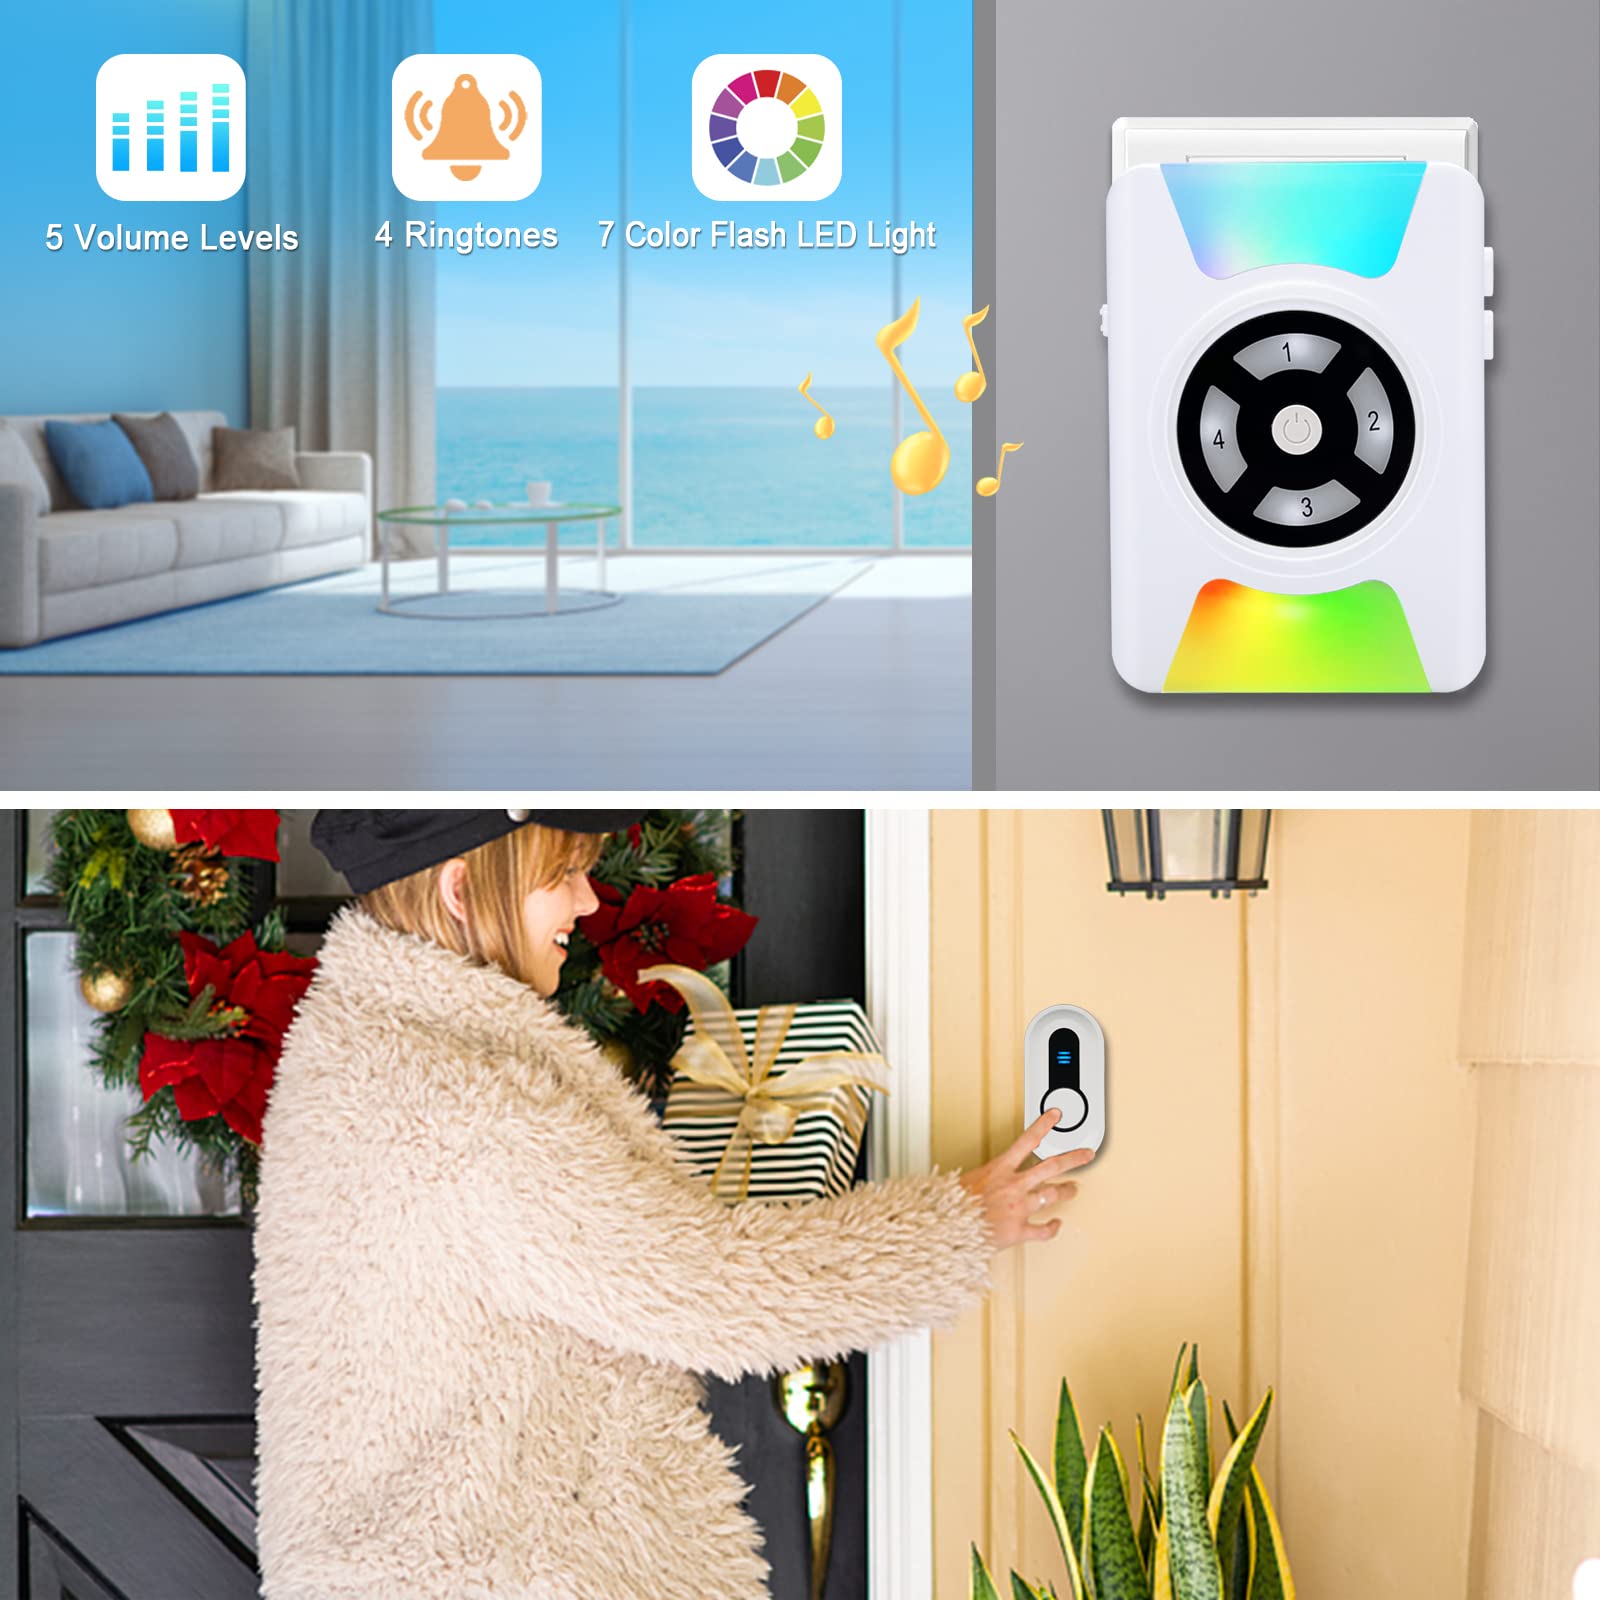 Door Chime Daytech Wireless Doorbell Chime With Colorful LED Flash Battery Operated Door Open Doorbell, 110dB loud Sound, Mute Mode, For Home, Apartments, Office, White, 1 Receiver + 1 Button